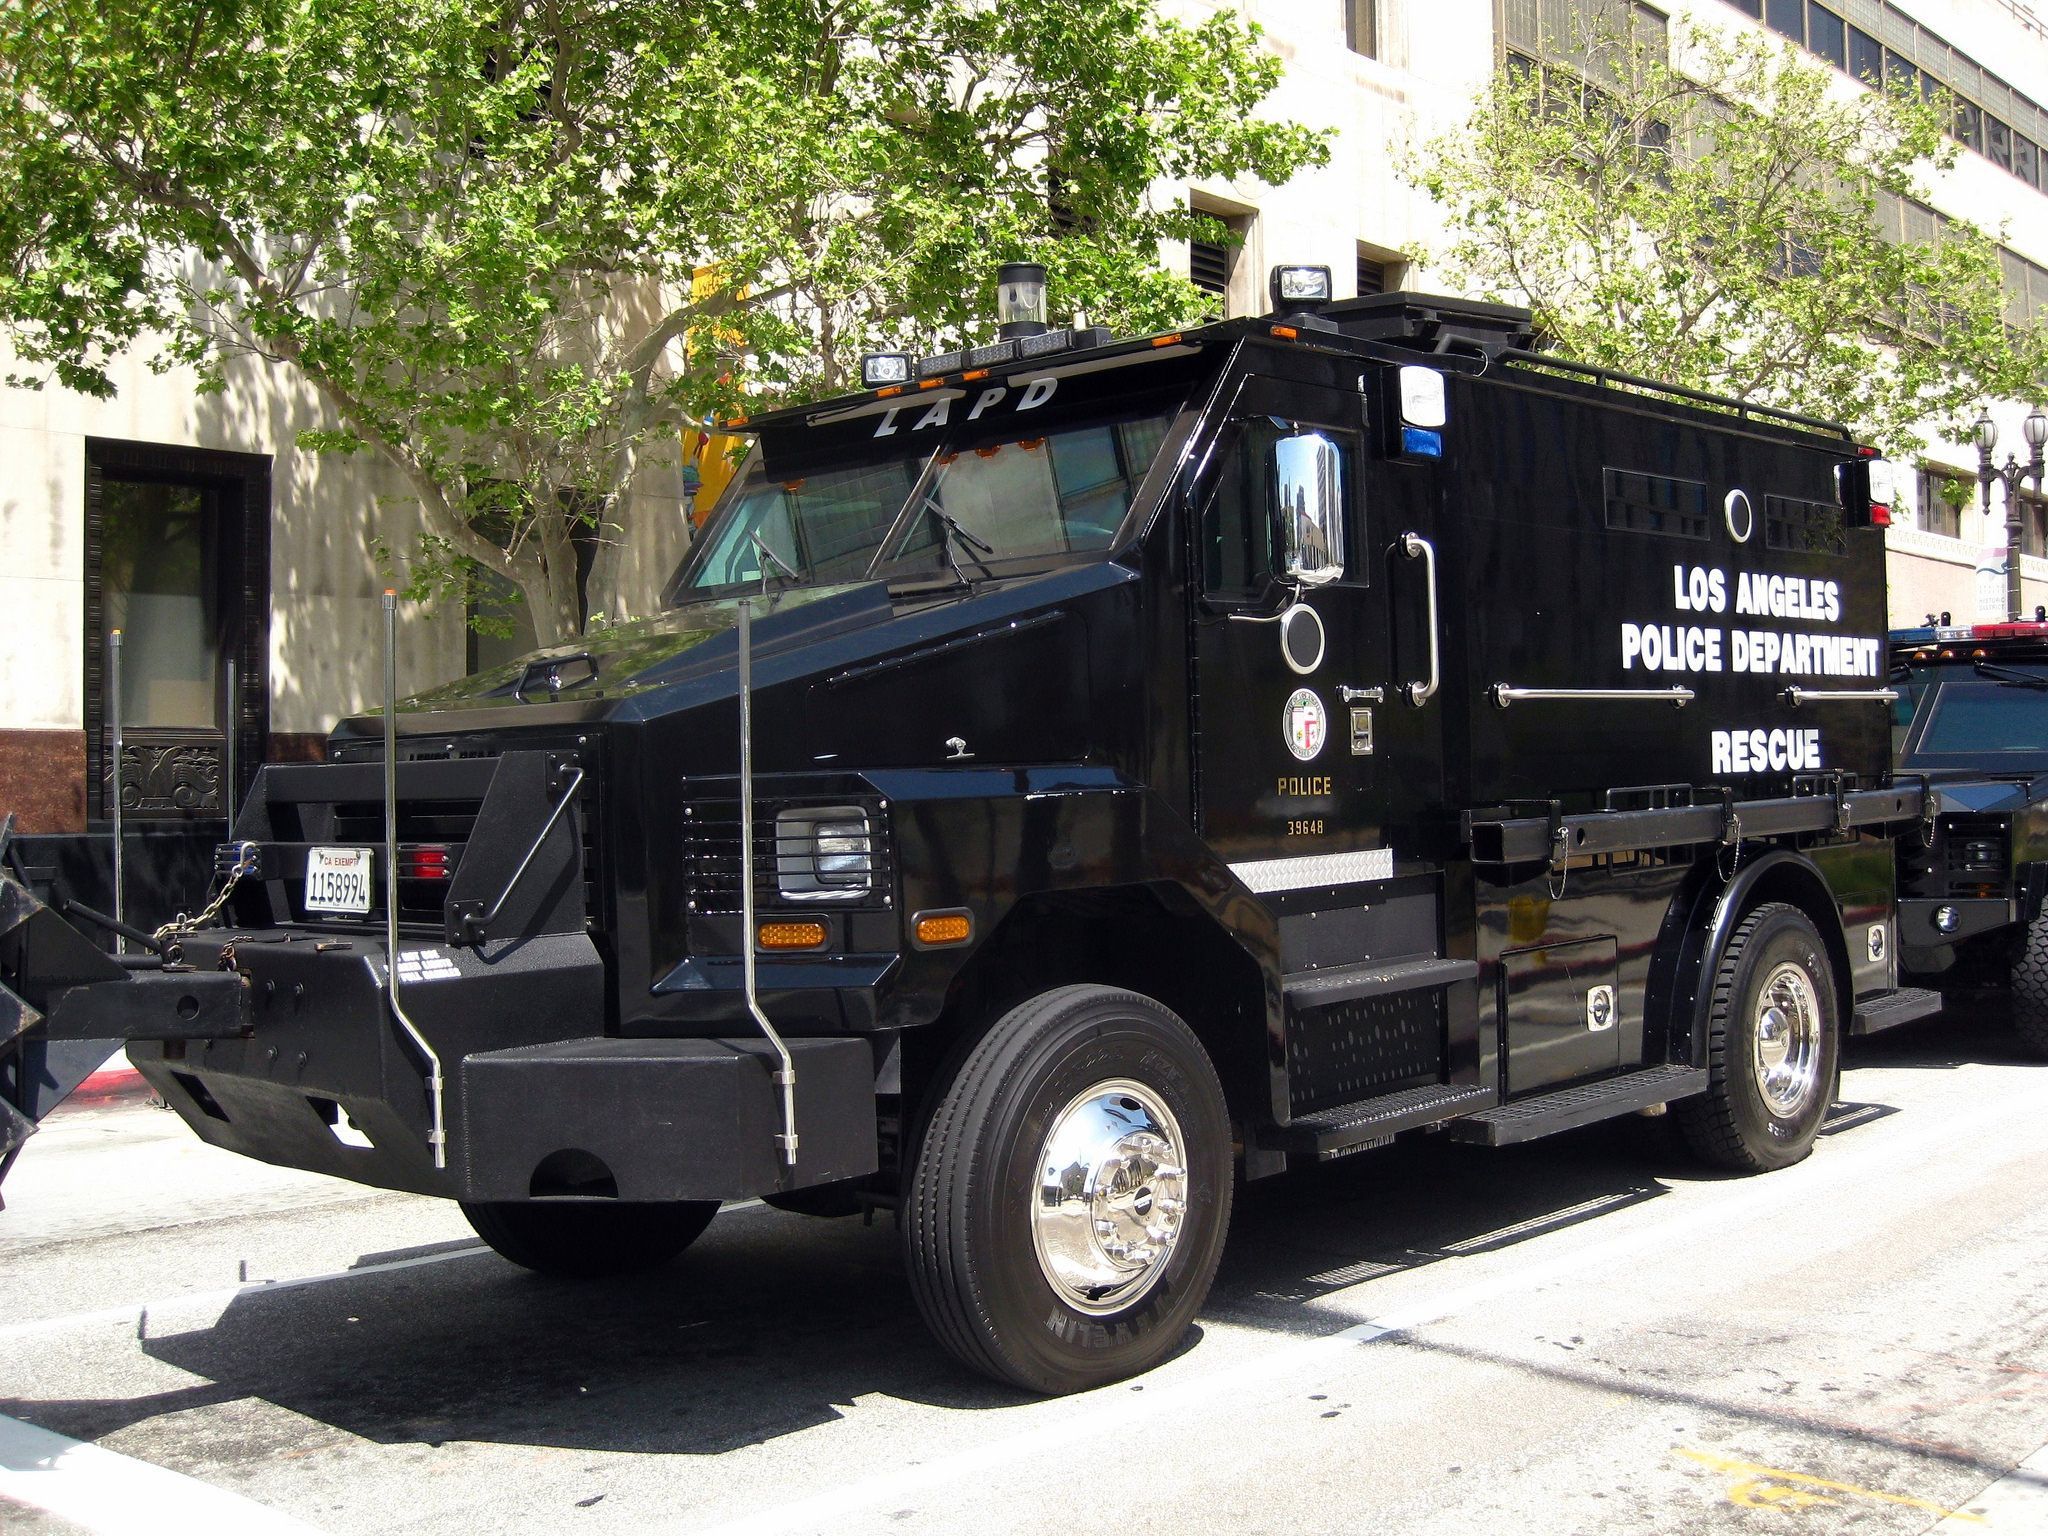 LAPD rescue vehicle with battering ram in the front. Police truck, Rescue vehicles, Emergency vehicles